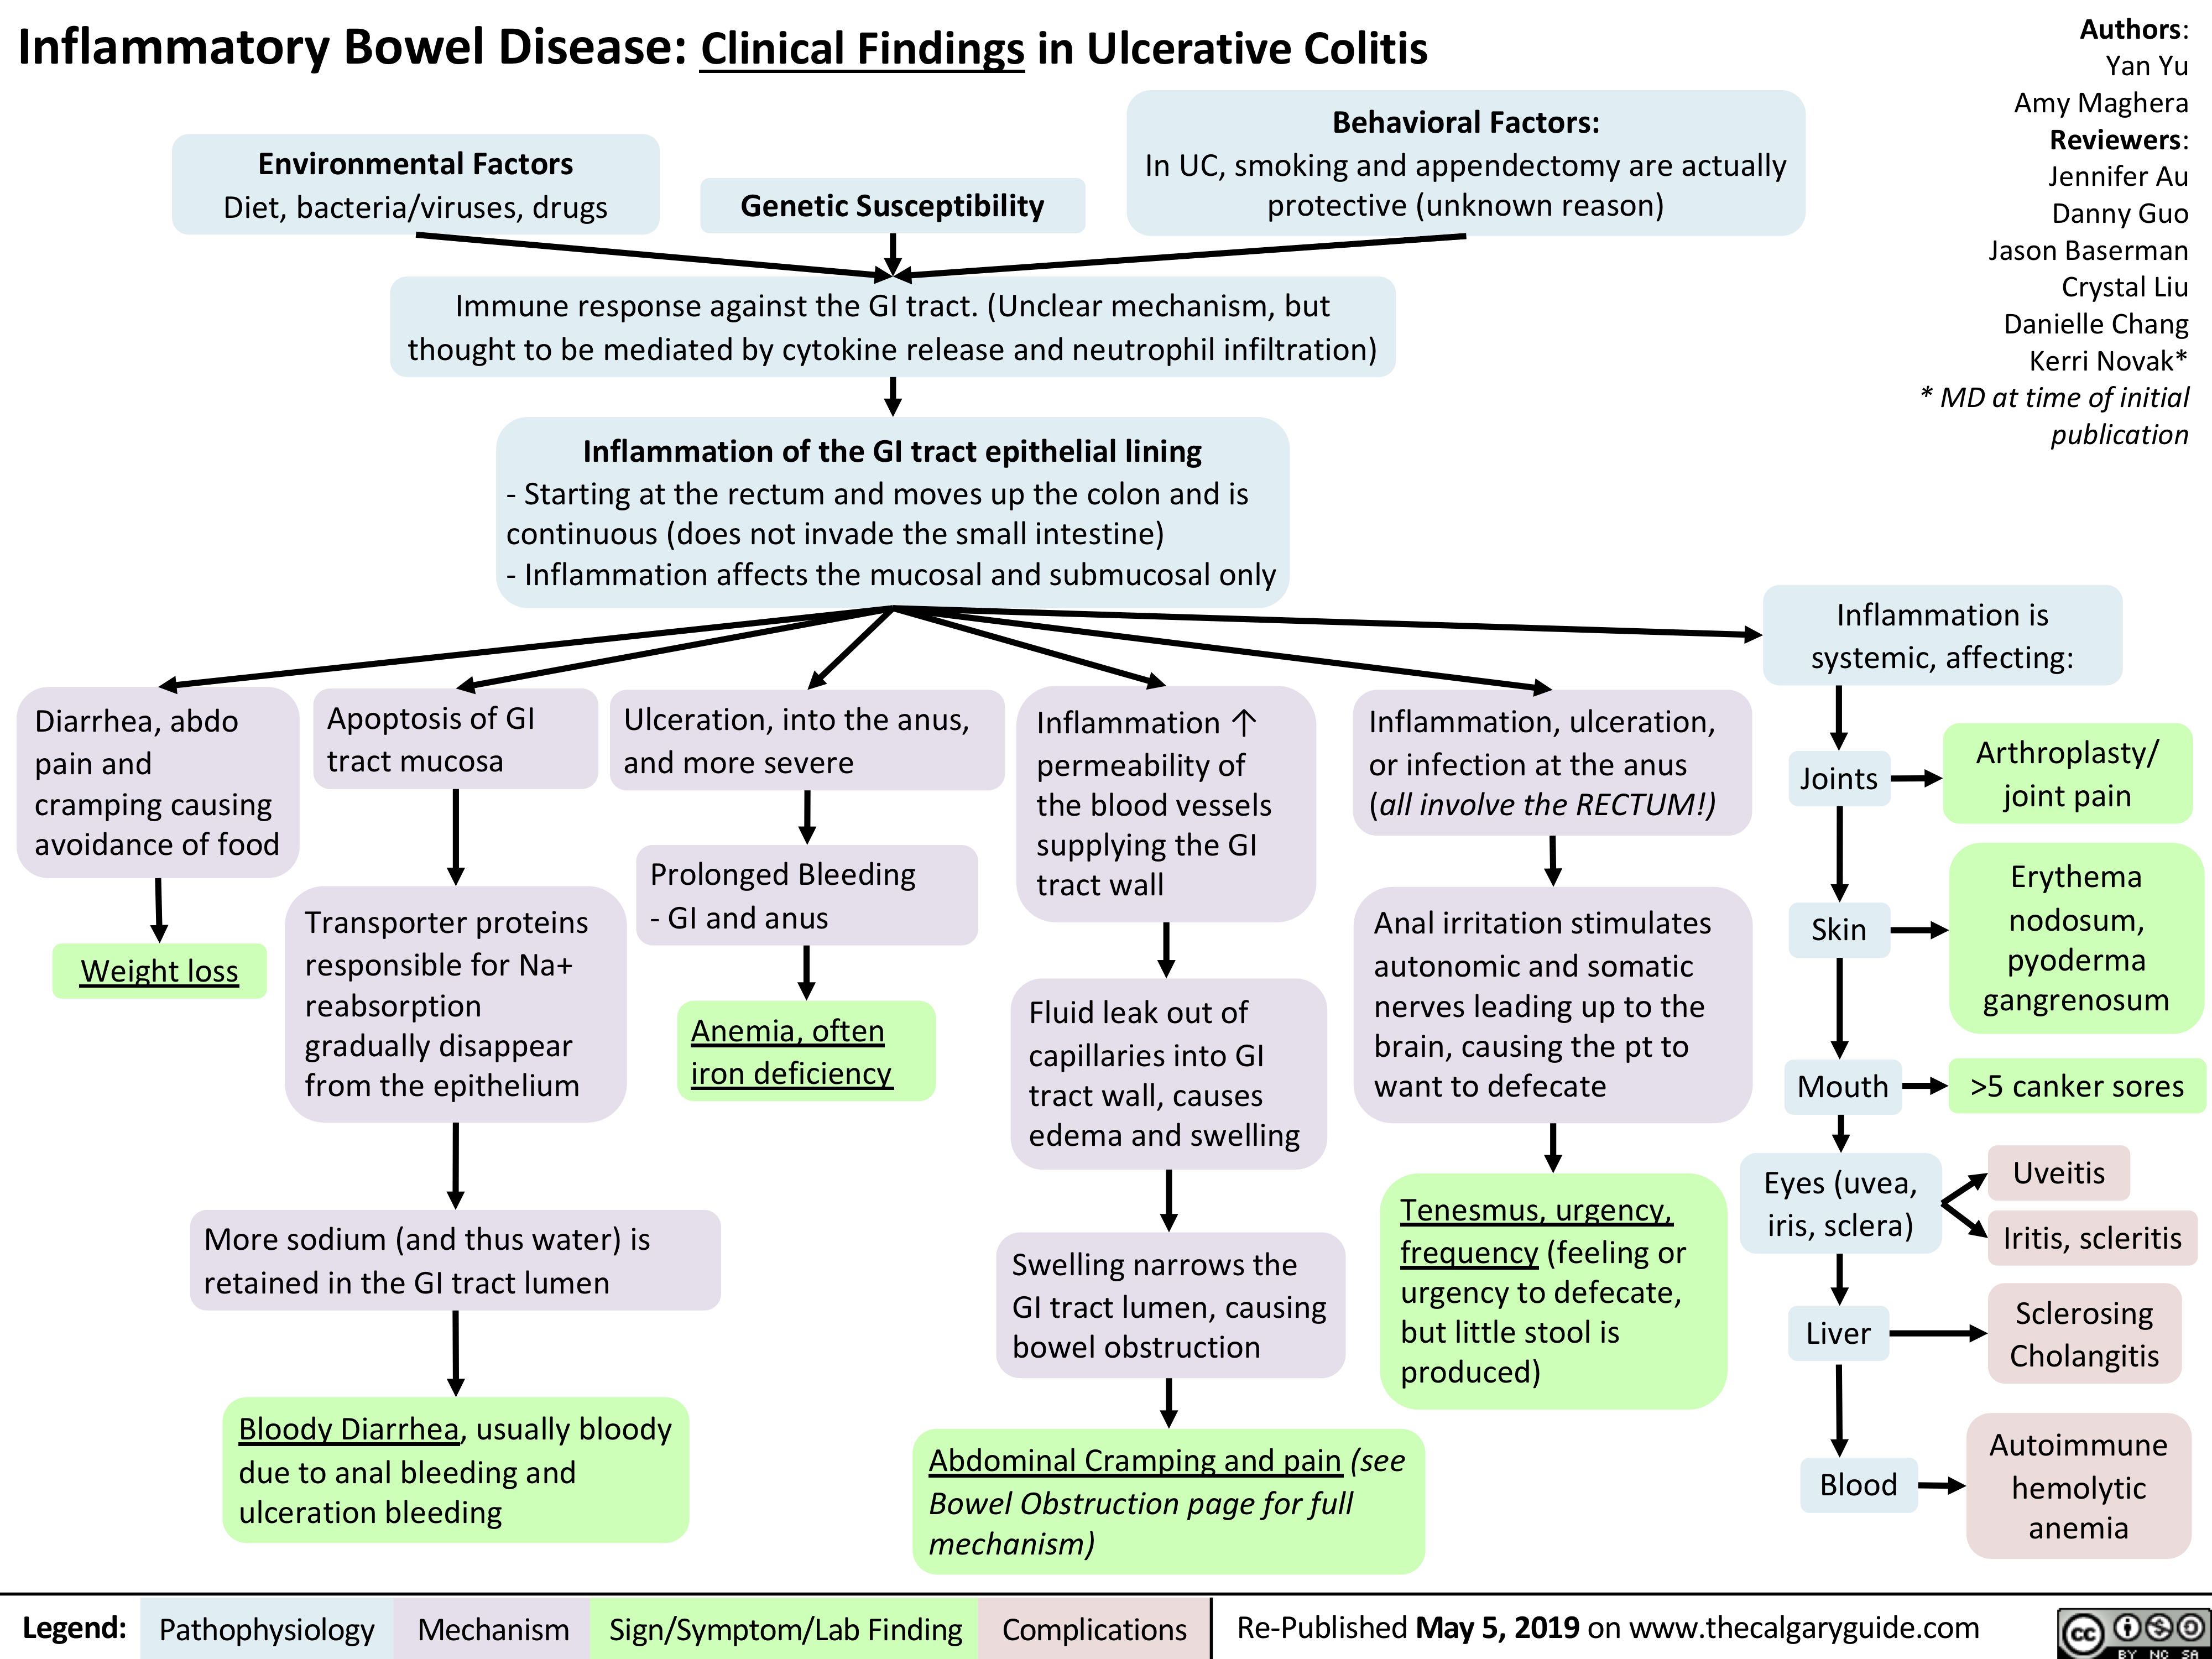 Inflammatory Bowel Disease: Clinical Findings in Ulcerative Colitis
Authors: Yan Yu Amy Maghera Reviewers: Jennifer Au Danny Guo Jason Baserman Crystal Liu Danielle Chang Kerri Novak* * MD at time of initial publication
Inflammation is systemic, affecting:
   Environmental Factors
Diet, bacteria/viruses, drugs
Genetic Susceptibility
Behavioral Factors:
In UC, smoking and appendectomy are actually protective (unknown reason)
     Immune response against the GI tract. (Unclear mechanism, but thought to be mediated by cytokine release and neutrophil infiltration)
  Inflammation of the GI tract epithelial lining
- Starting at the rectum and moves up the colon and is continuous (does not invade the small intestine)
- Inflammation affects the mucosal and submucosal only
        Diarrhea, abdo pain and cramping causing avoidance of food
Weight loss
Apoptosis of GI tract mucosa
Transporter proteins responsible for Na+ reabsorption gradually disappear from the epithelium
Ulceration, into the anus, and more severe
Prolonged Bleeding - GI and anus
Anemia, often iron deficiency
Inflammation ↑ permeability of the blood vessels supplying the GI tract wall
Fluid leak out of capillaries into GI tract wall, causes edema and swelling
Swelling narrows the GI tract lumen, causing bowel obstruction
Inflammation, ulceration, or infection at the anus (all involve the RECTUM!)
Anal irritation stimulates autonomic and somatic nerves leading up to the brain, causing the pt to want to defecate
Tenesmus, urgency, frequency (feeling or urgency to defecate, but little stool is produced)
Joints Skin
Arthroplasty/ joint pain
Erythema nodosum, pyoderma gangrenosum
                     Mouth       >5 canker sores
          More sodium (and thus water) is retained in the GI tract lumen
Bloody Diarrhea, usually bloody due to anal bleeding and ulceration bleeding
Abdominal Cramping and pain (see Bowel Obstruction page for full mechanism)
Eyes (uvea, iris, sclera)
Liver Blood
Uveitis
Iritis, scleritis
Sclerosing Cholangitis
Autoimmune hemolytic anemia
                Legend:
 Pathophysiology
 Mechanism
Sign/Symptom/Lab Finding
  Complications
Re-Published May 5, 2019 on www.thecalgaryguide.com
   